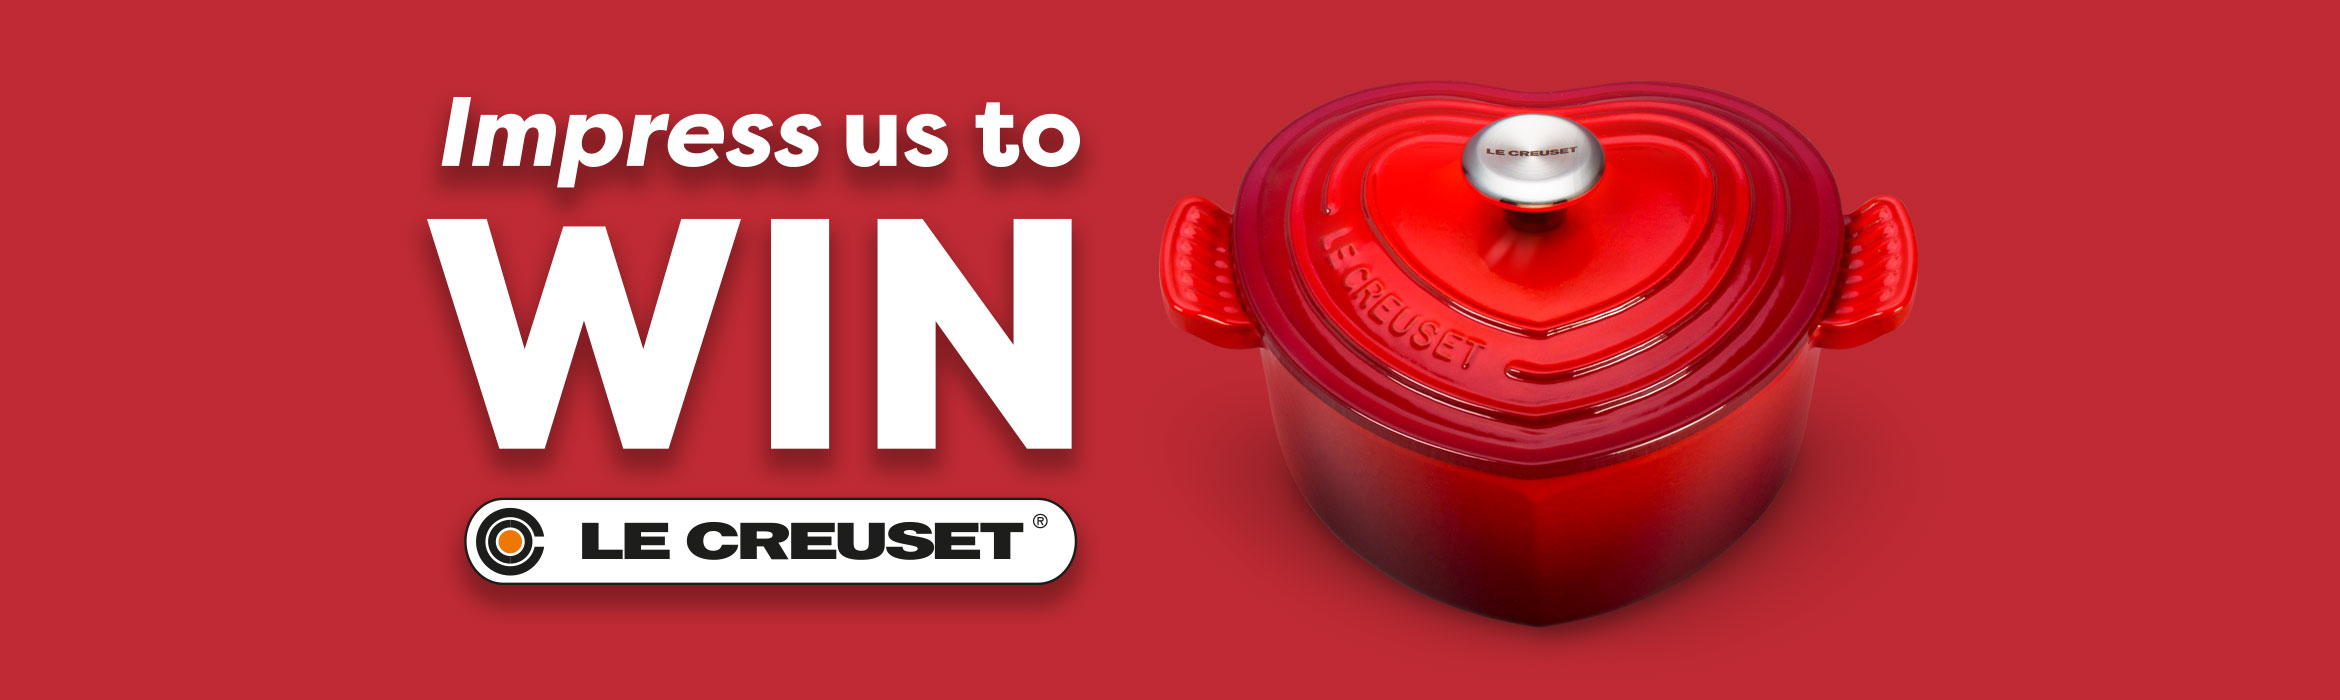 Luv-a-Duck – Impress us to win – Le Creuset